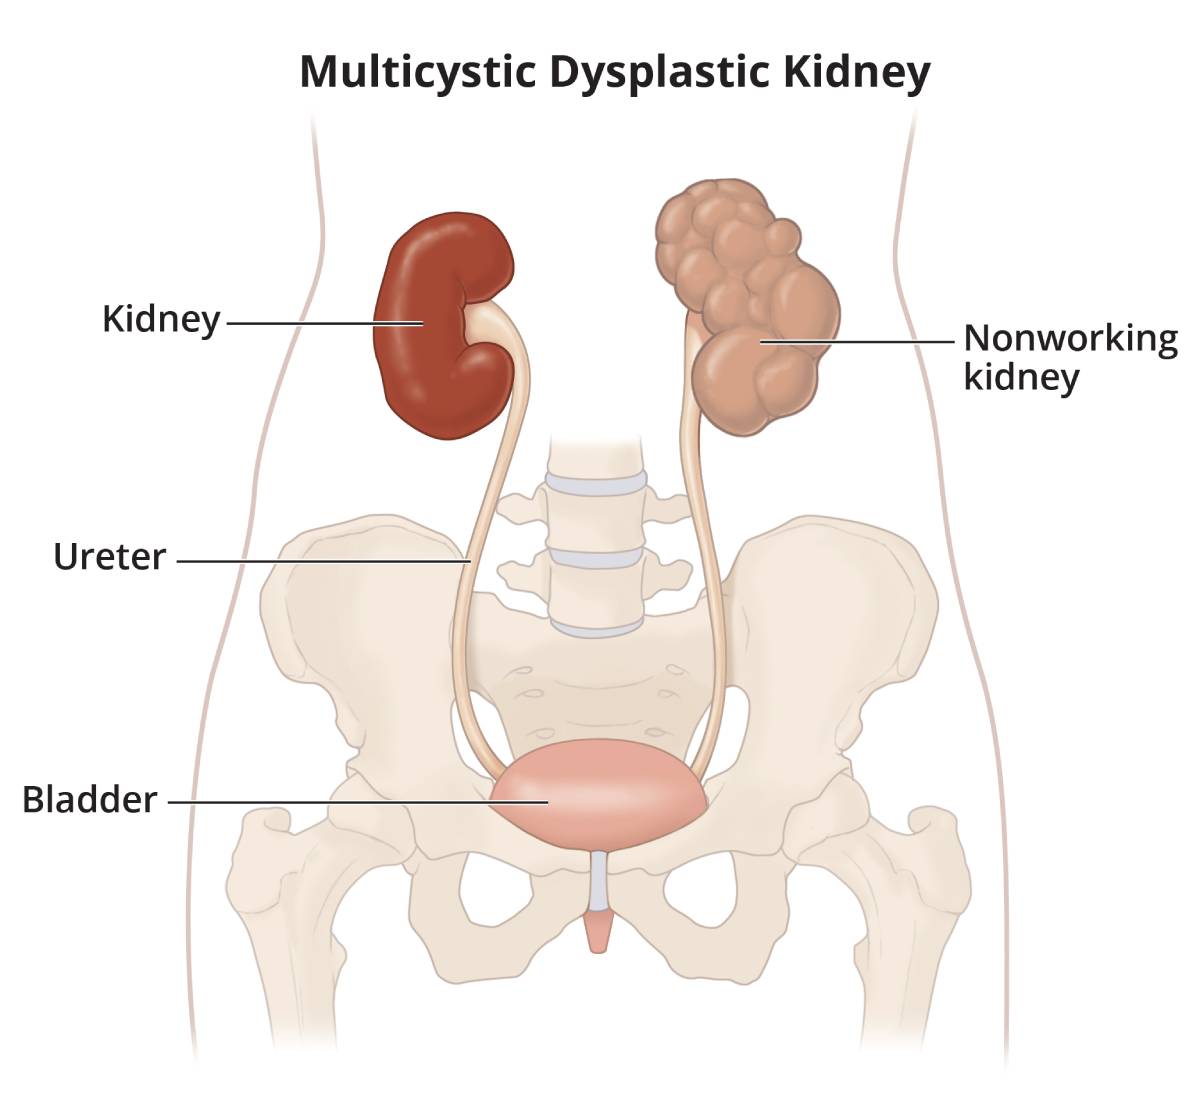 A urinary tract showing a multicystic dysplastic kidney, labeled as a nonworking kidney. The working kidney, ureter, and bladder are also labeled.